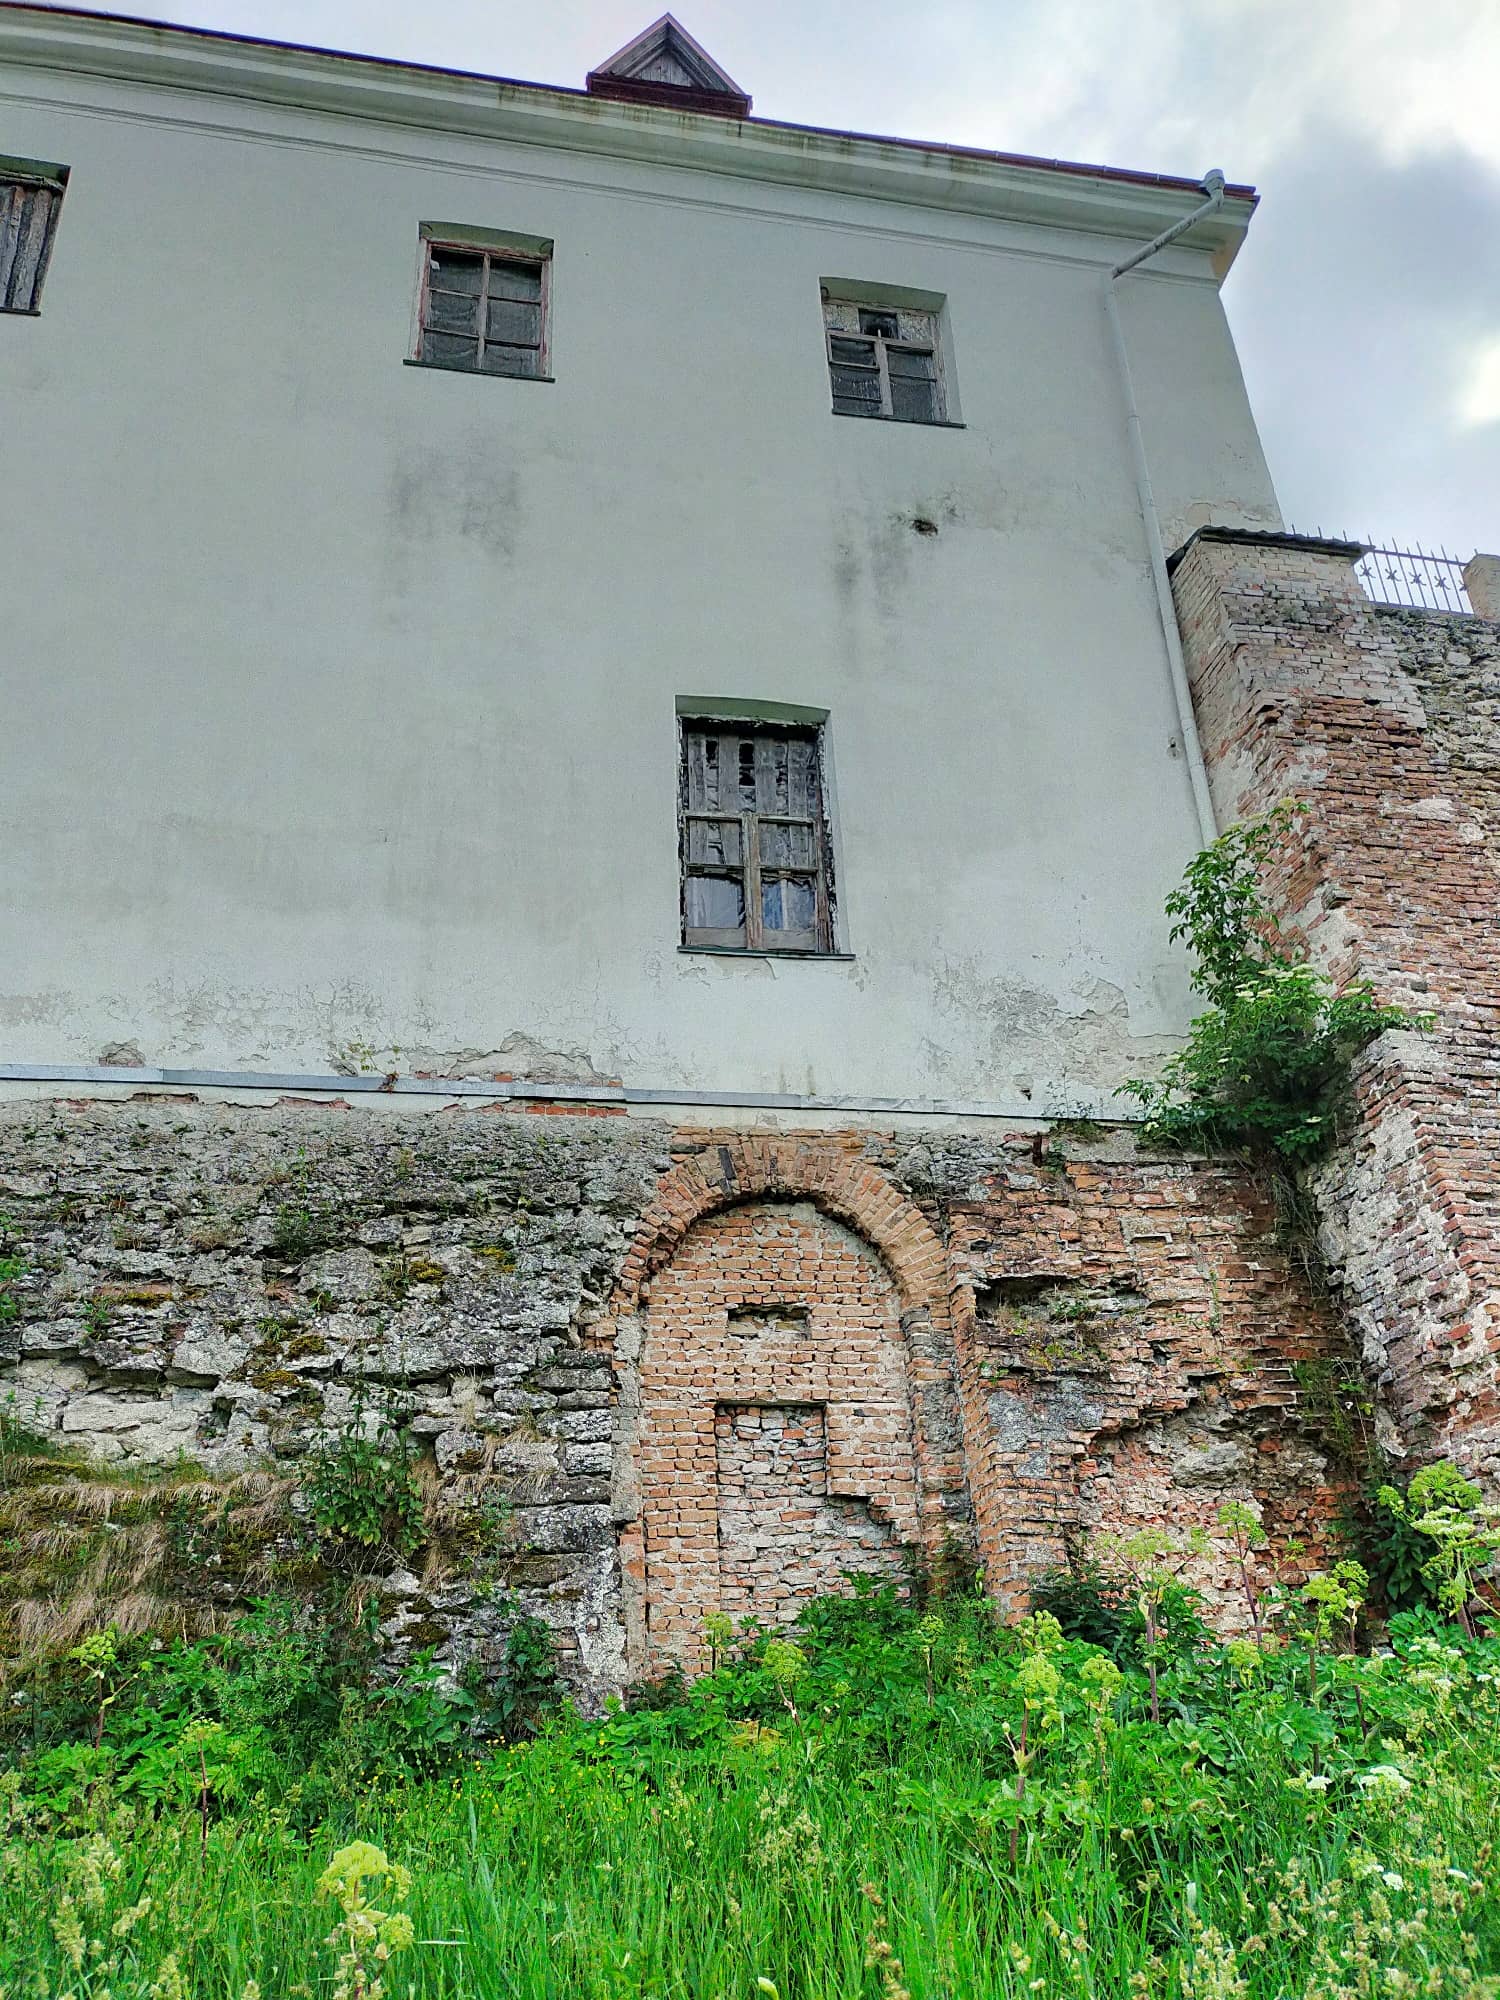 The back of the palace kn. Lubomyrsky - 2021